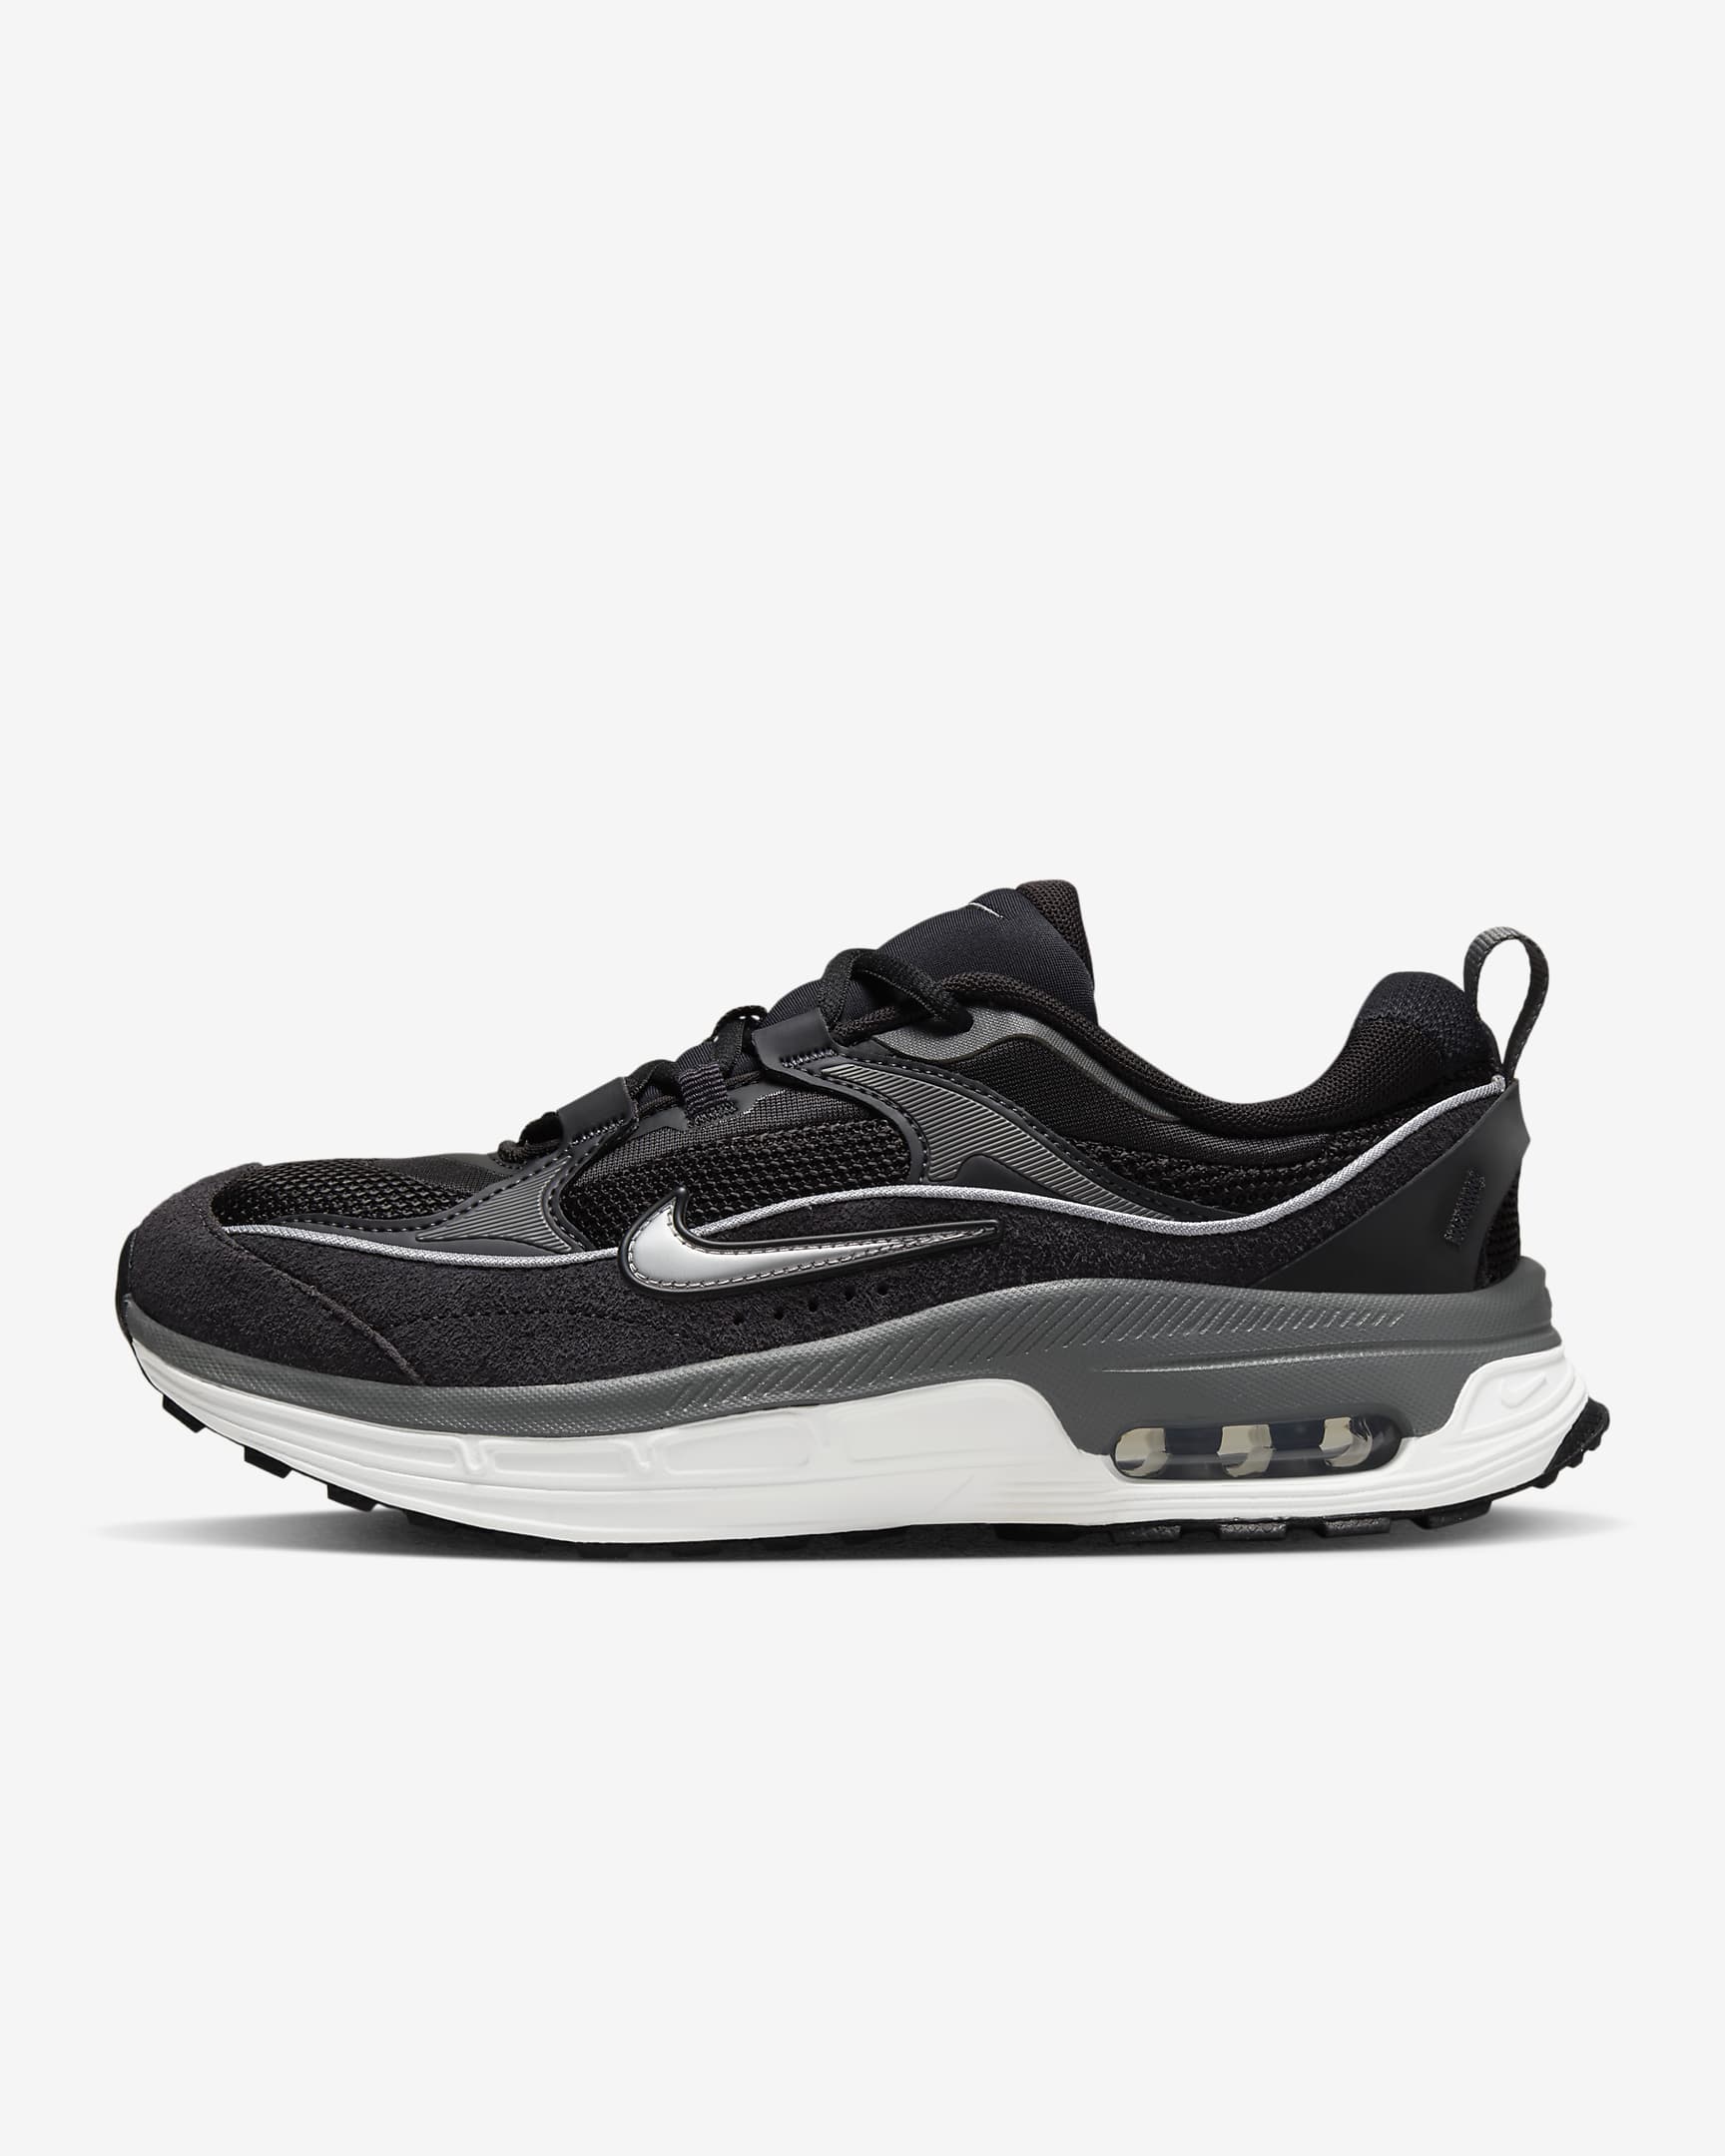 Nike Air Max Bliss Women's Shoes. Nike IL